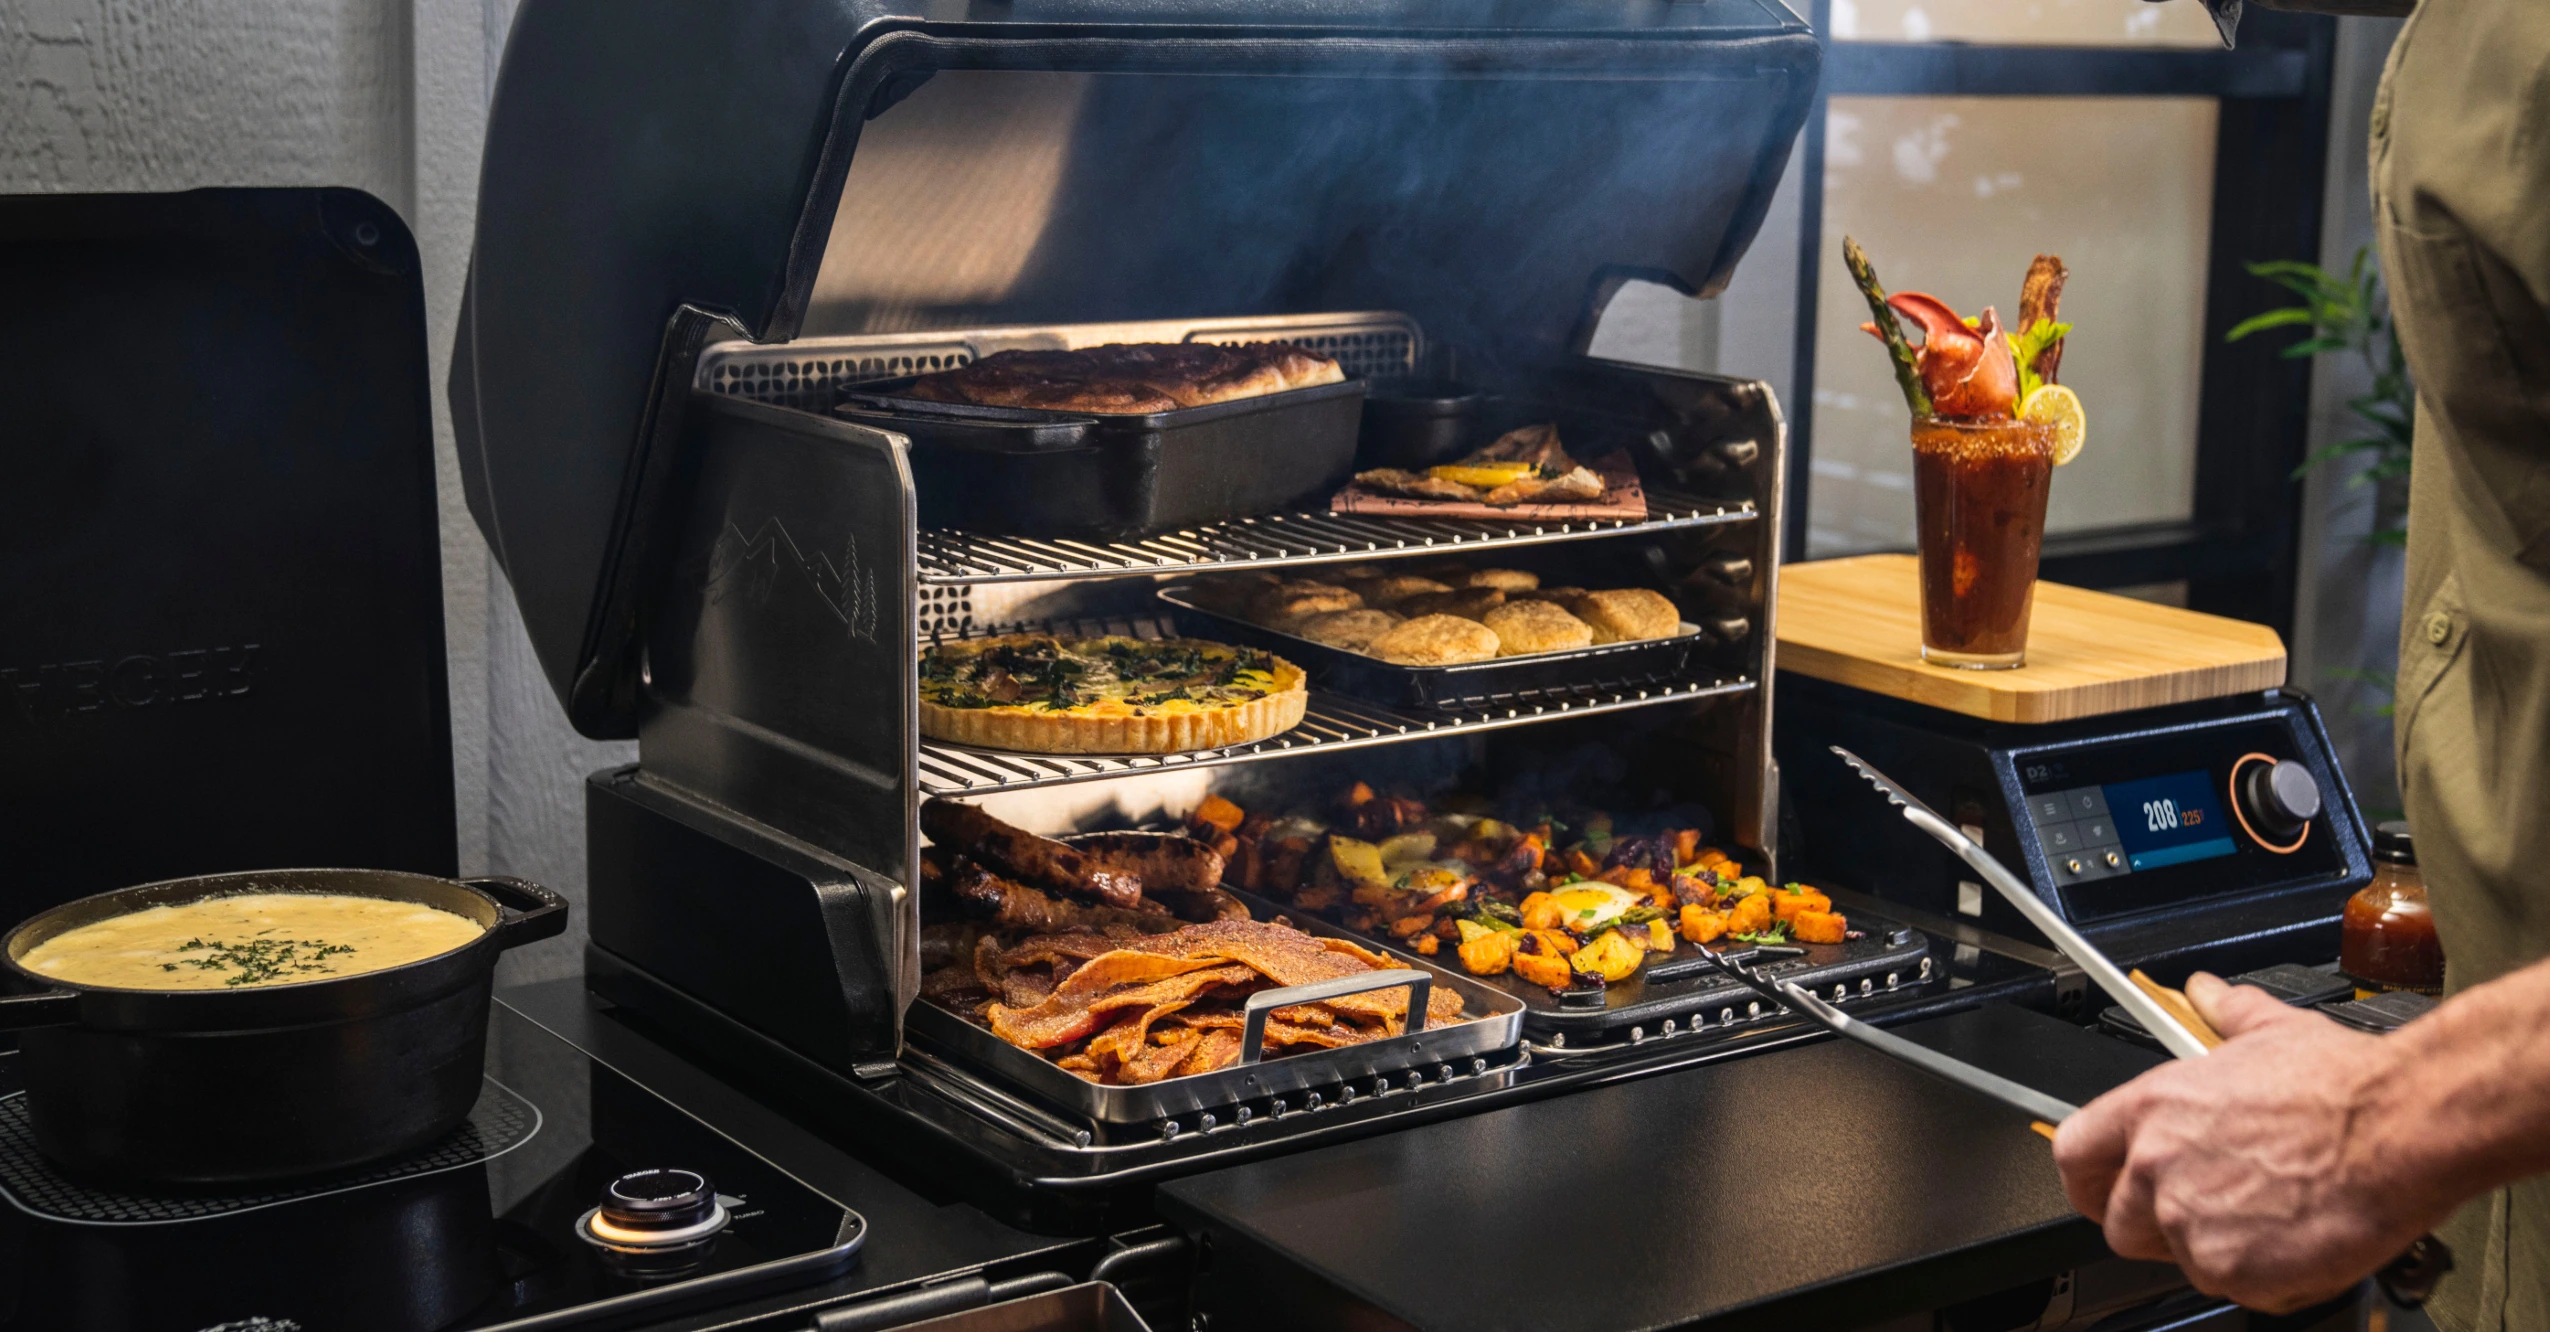 The Traeger Timberline Is A High-Tech Wood Pellet Grill Built For Foolproof Cookouts